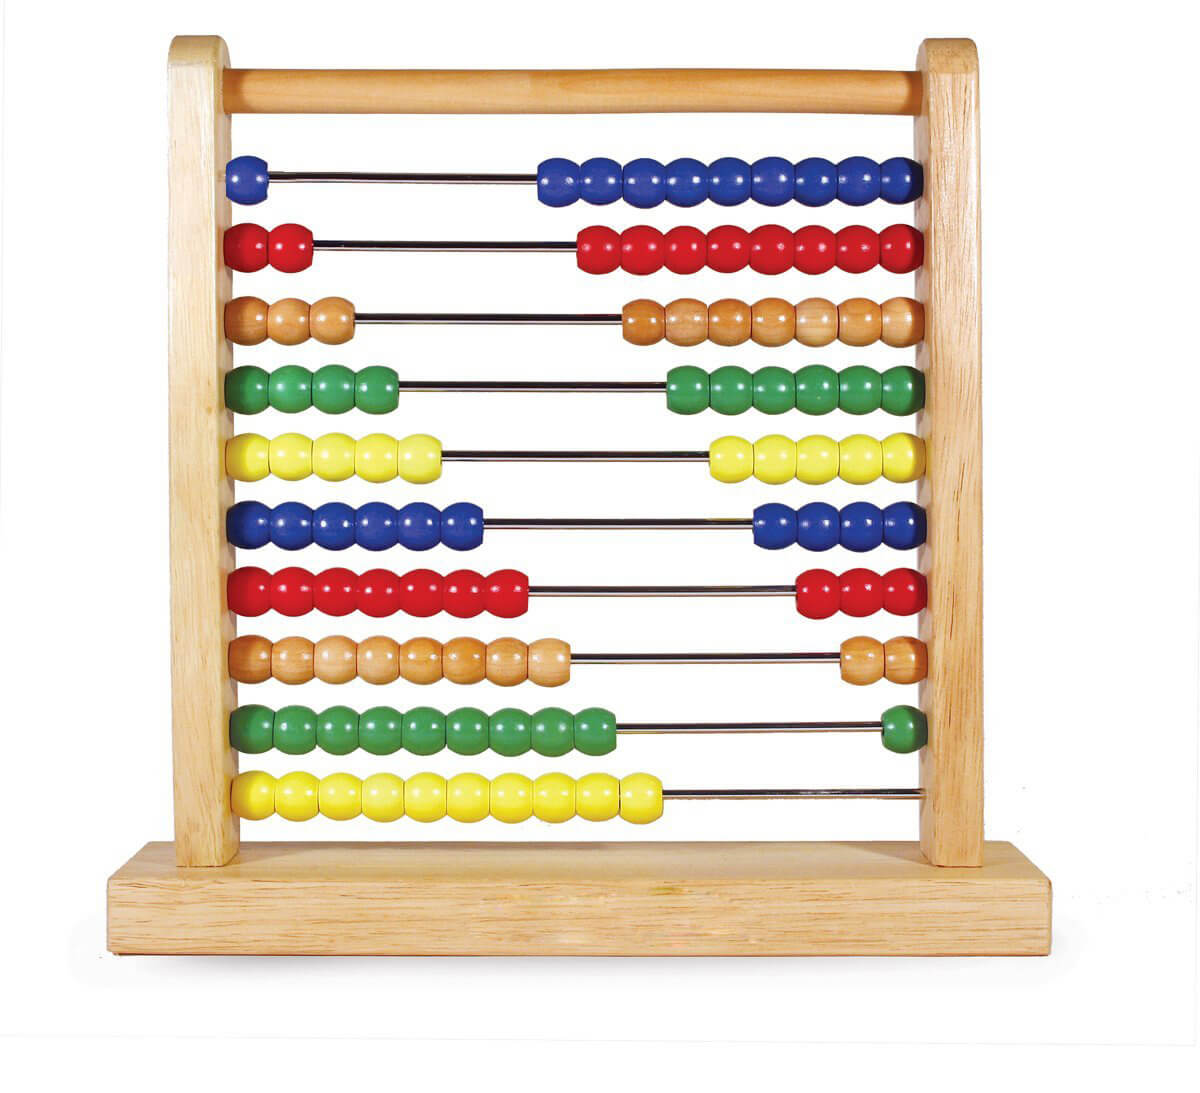 Relatively modern abacus